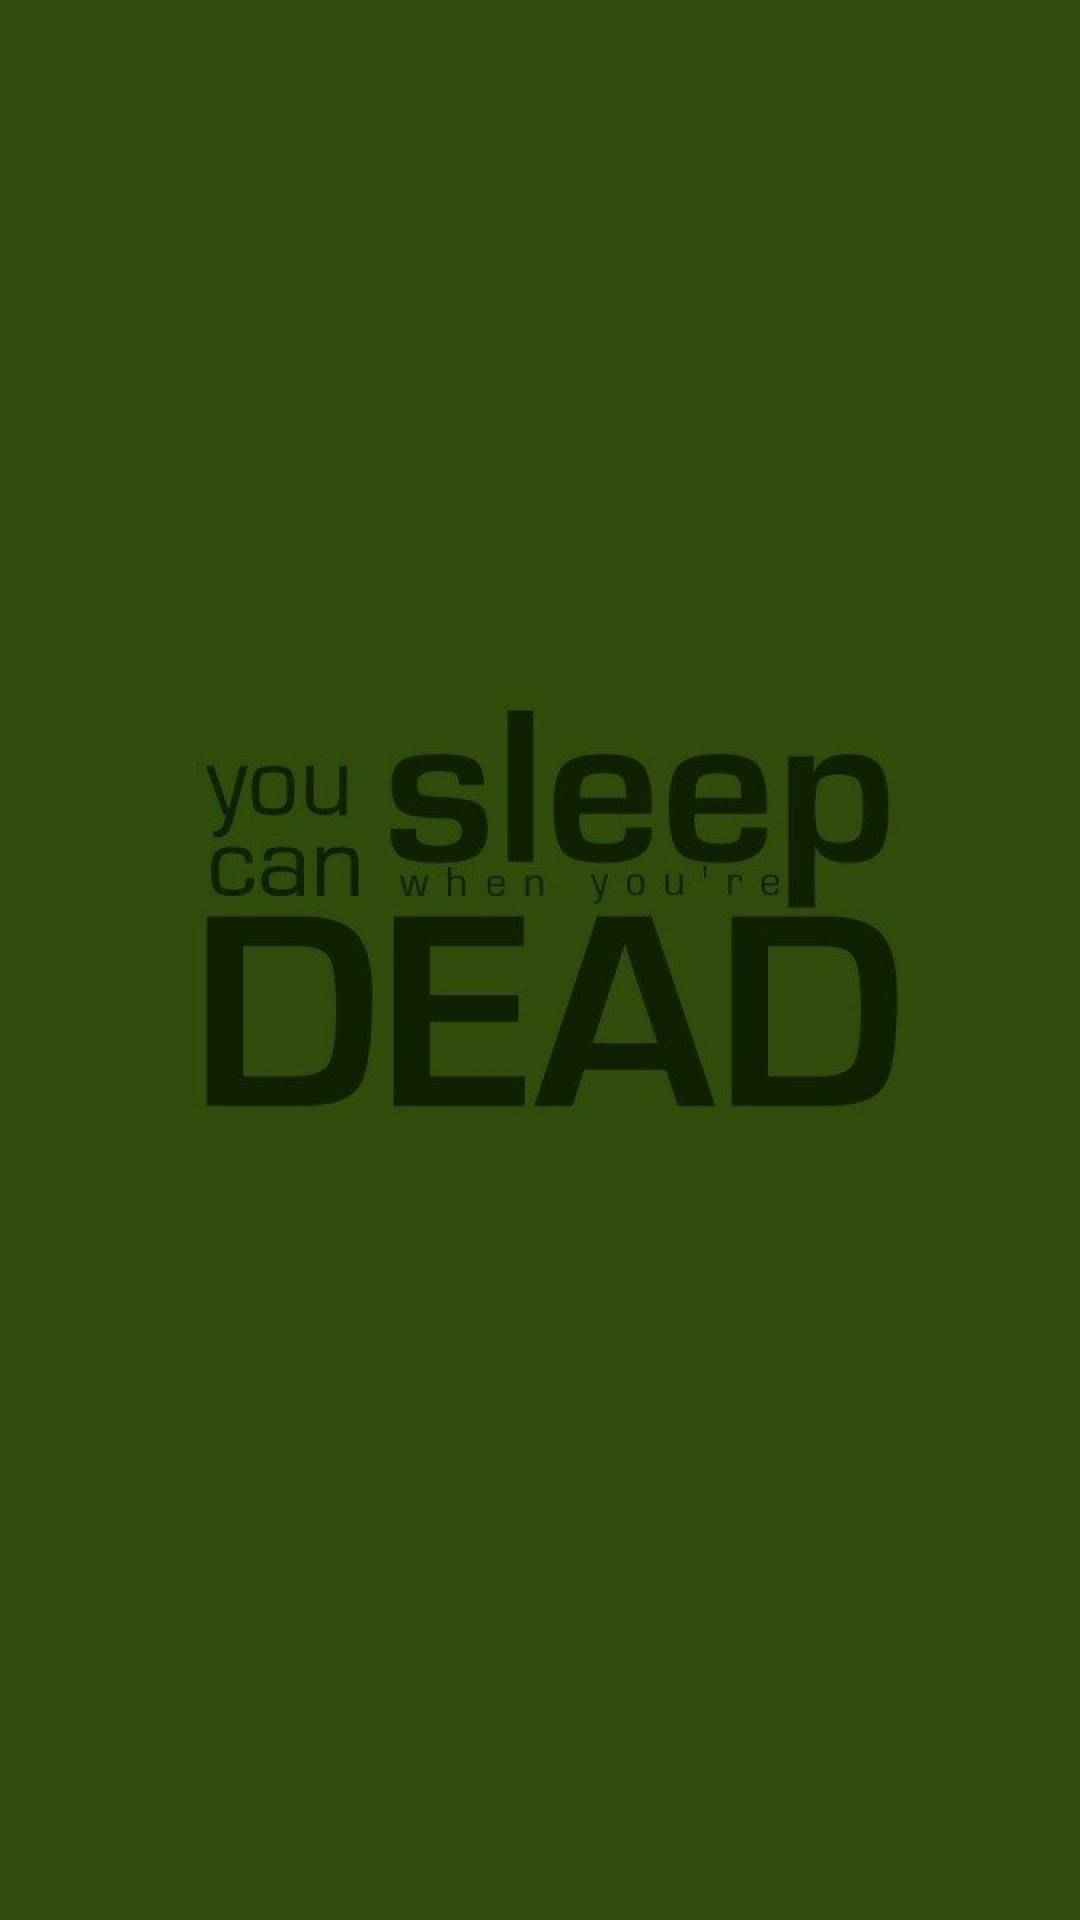 Sleep When You’re Dead Quote Plain Green